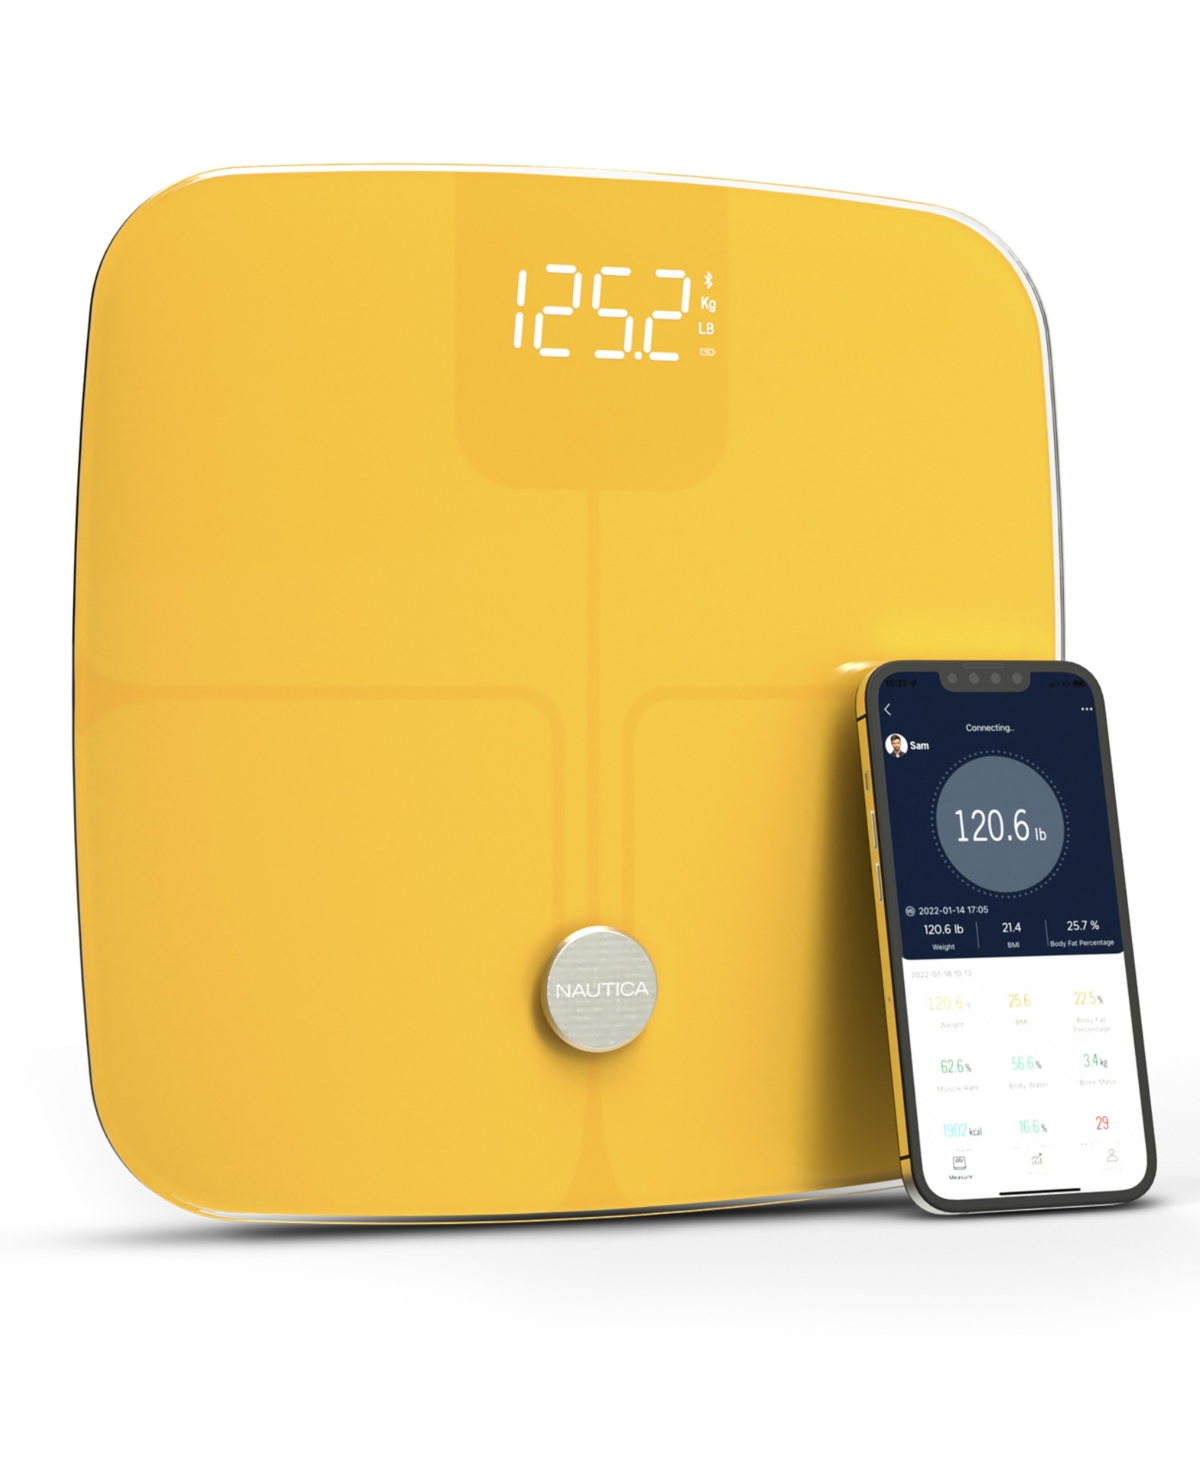 Nautica Smart Scale Plus Ito Technology In Old Gold-tone